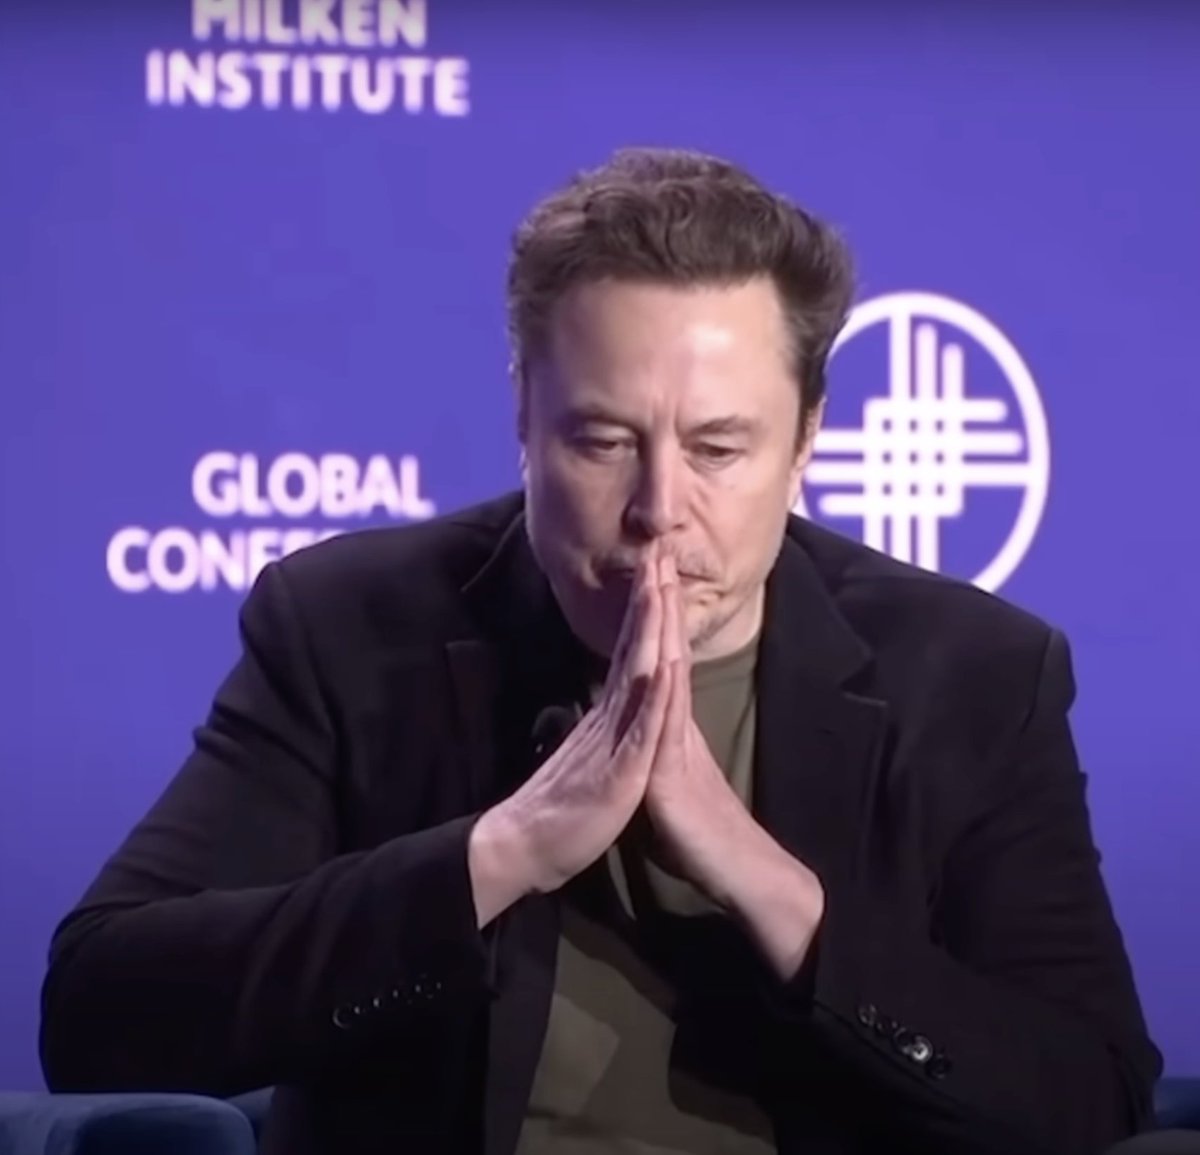 Yesterday, Elon Musk gave an electrifying talk at the Milken Conference. I literally got chills from what he revealed about AI. 5 astonishing highlights you need to see: